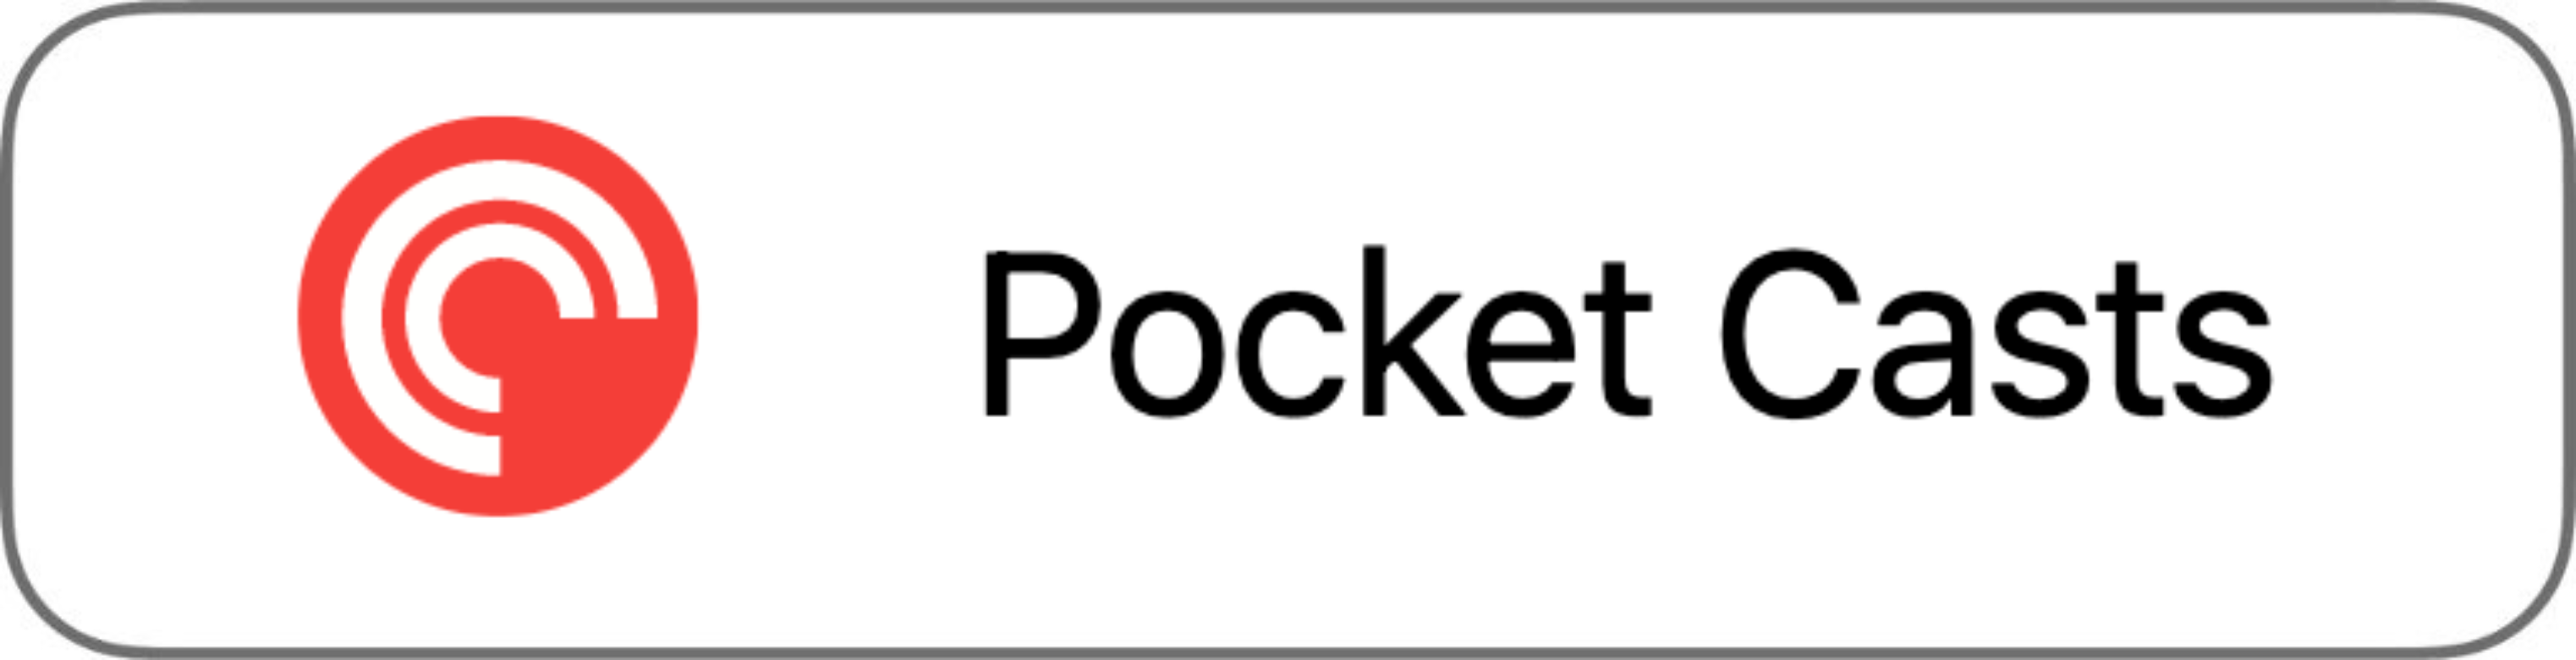 Pocket Casts - The Employee Advocacy & Influence Podcast by DSMN8